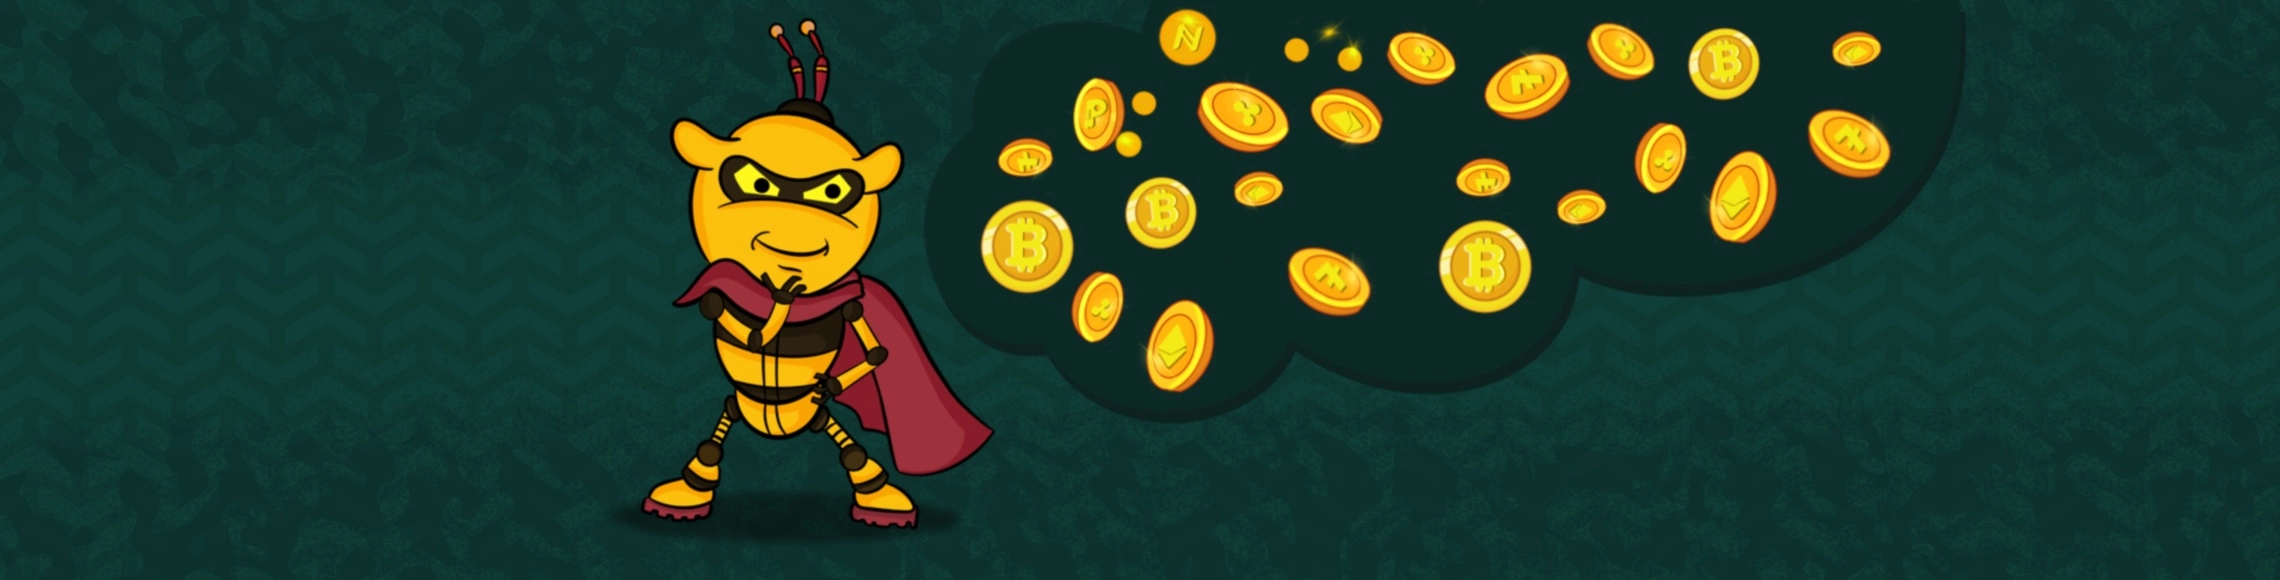 Have You Heard? online casino bitcoin Is Your Best Bet To Grow